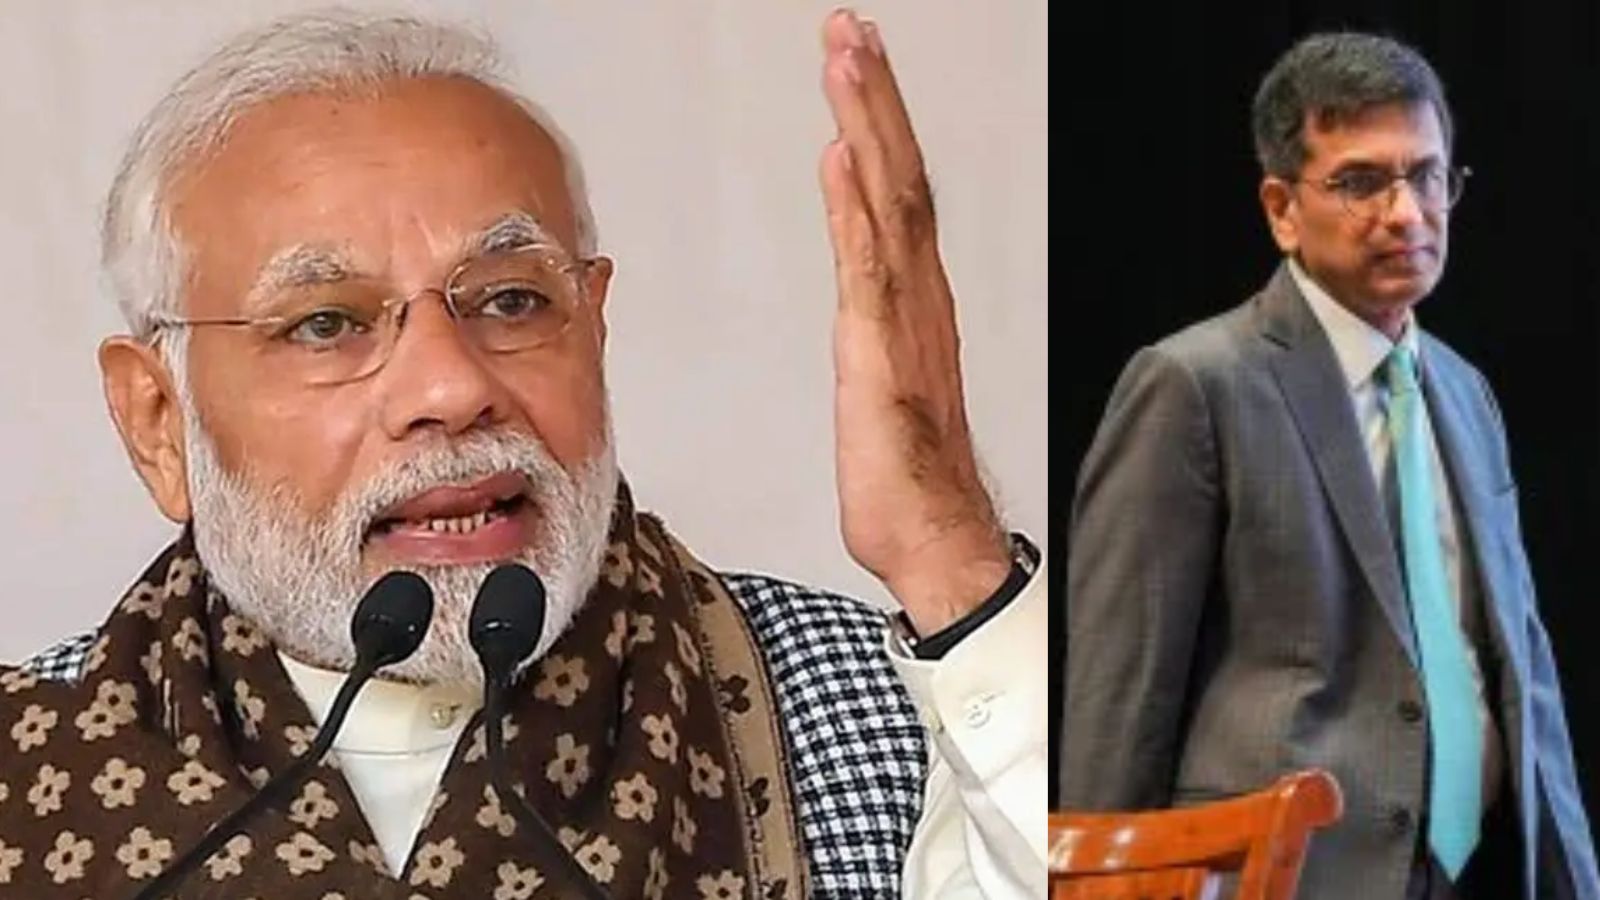 android, to browbeat, bully others is vintage congress culture: pm modi after lawyers write to cji on ‘vested interest group’